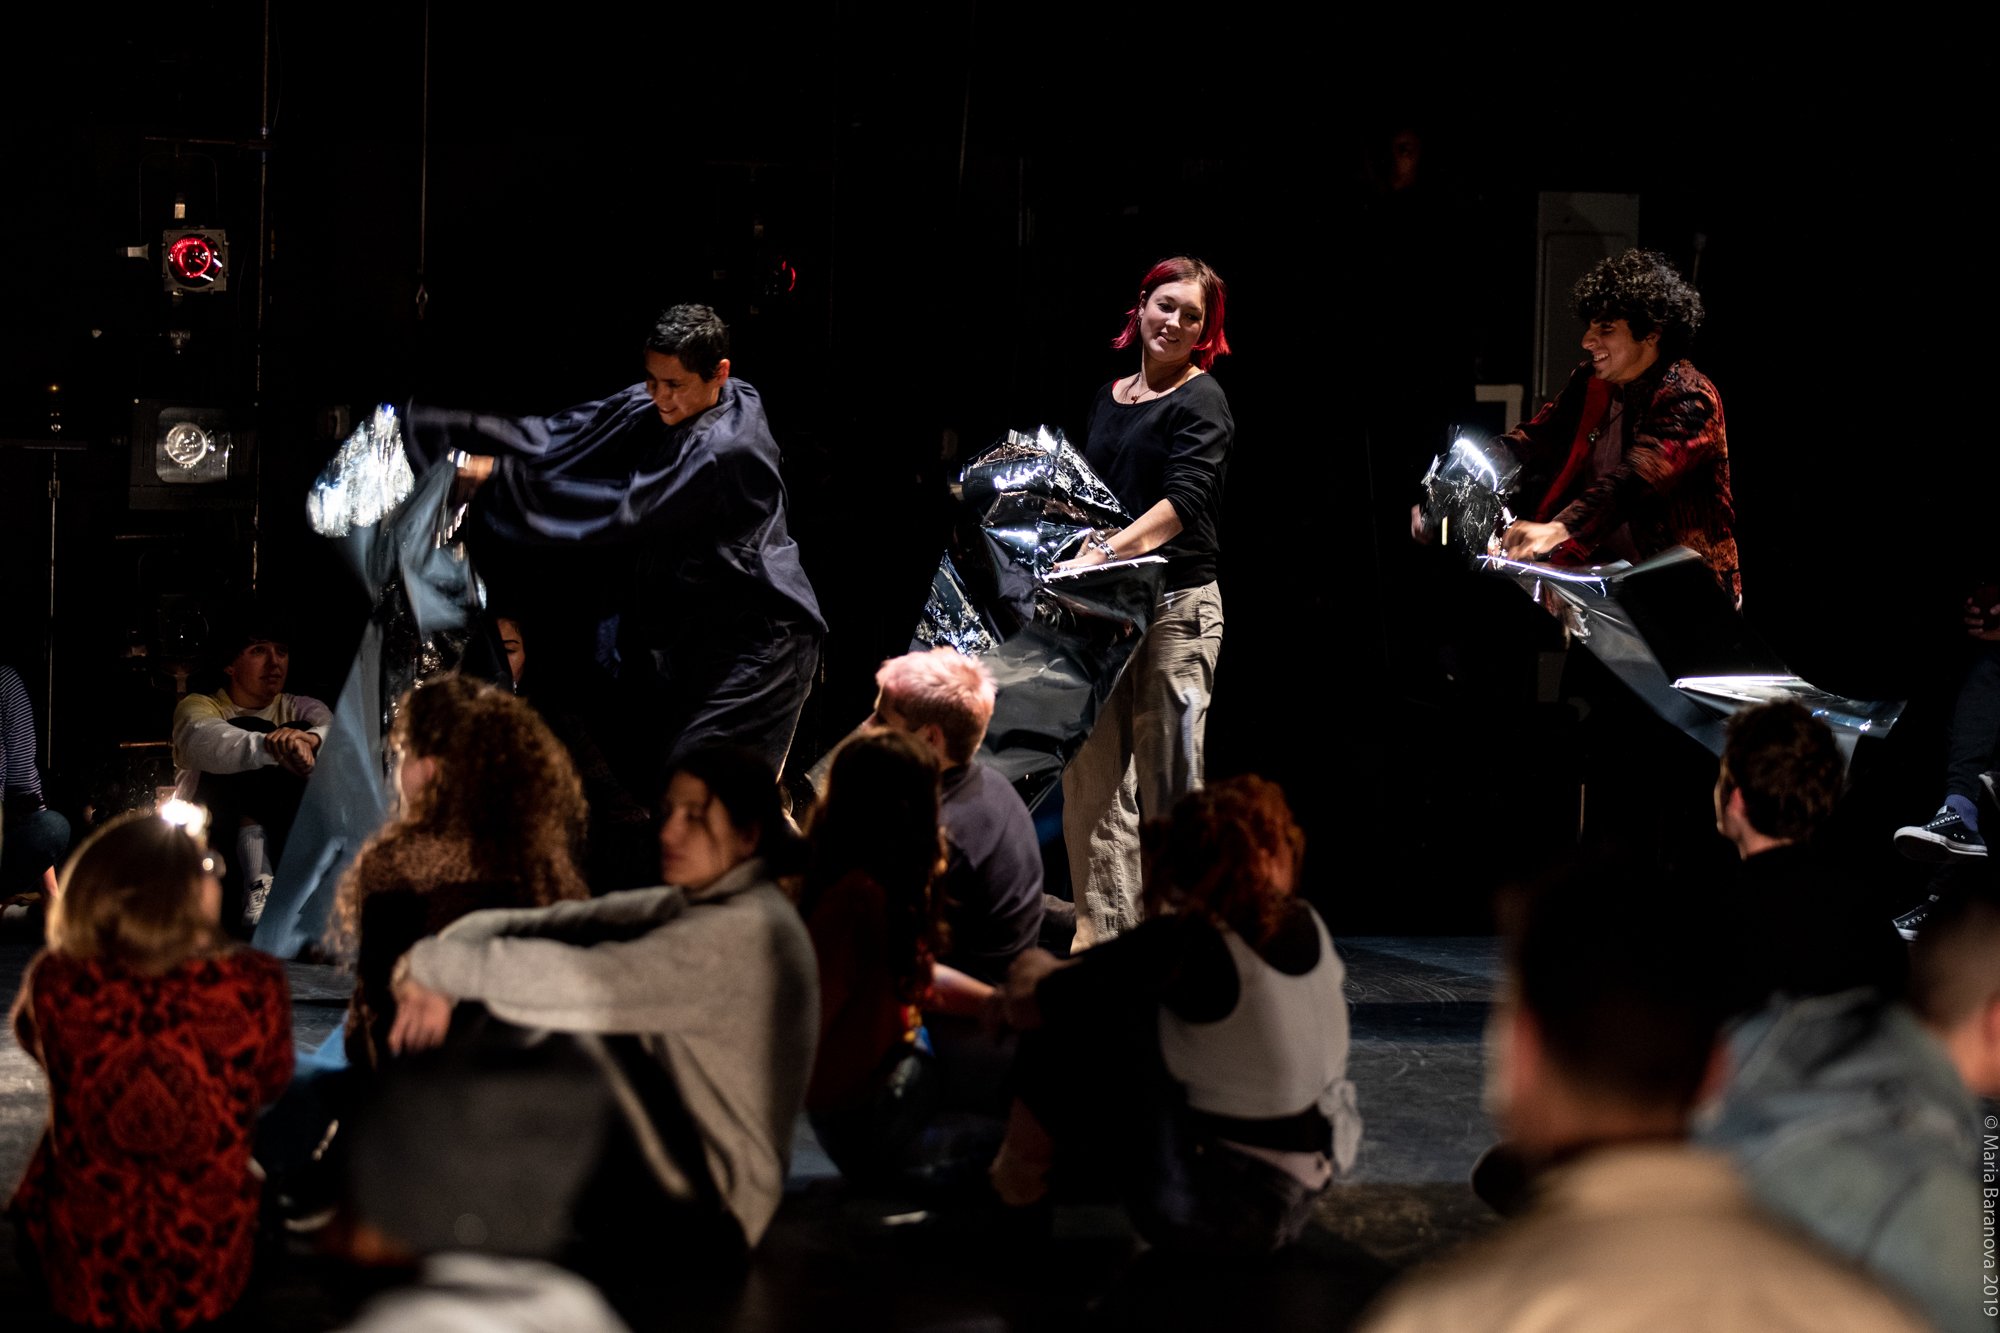 Three people wave sheets of mylar on a stage while a group sits in front of them. Photo by Maria Baranova.